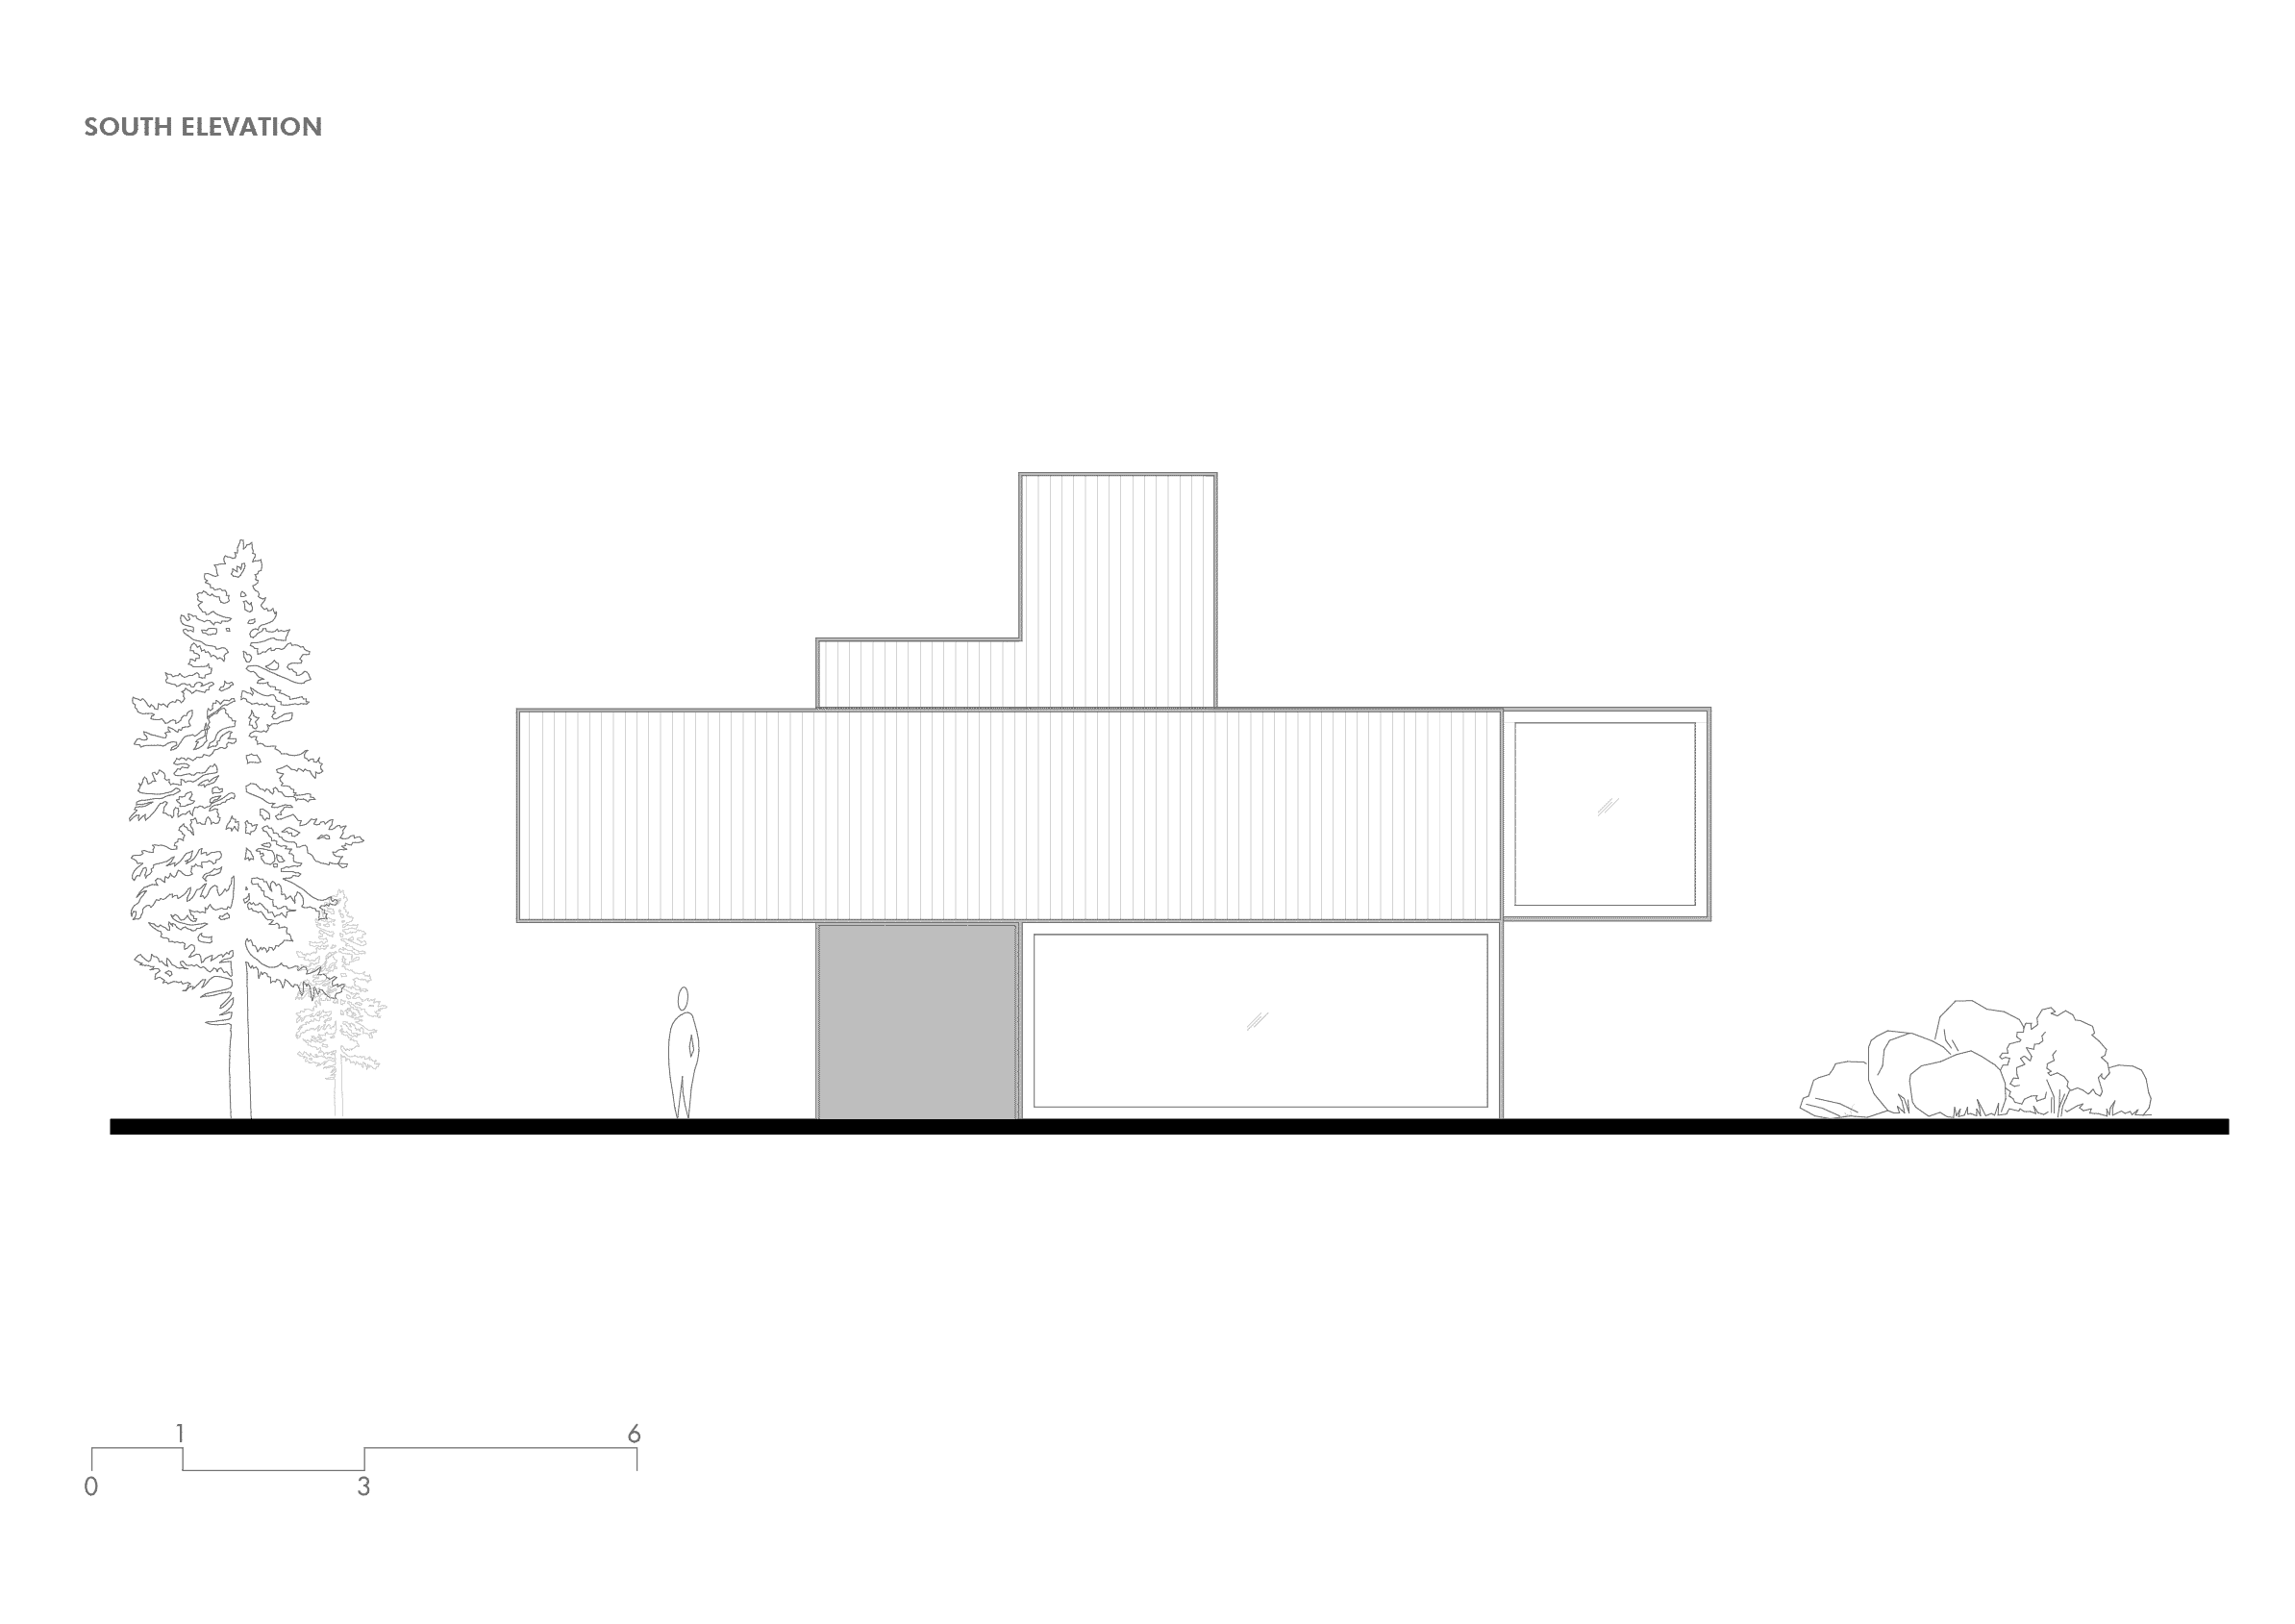 006-container-south-elevation2x